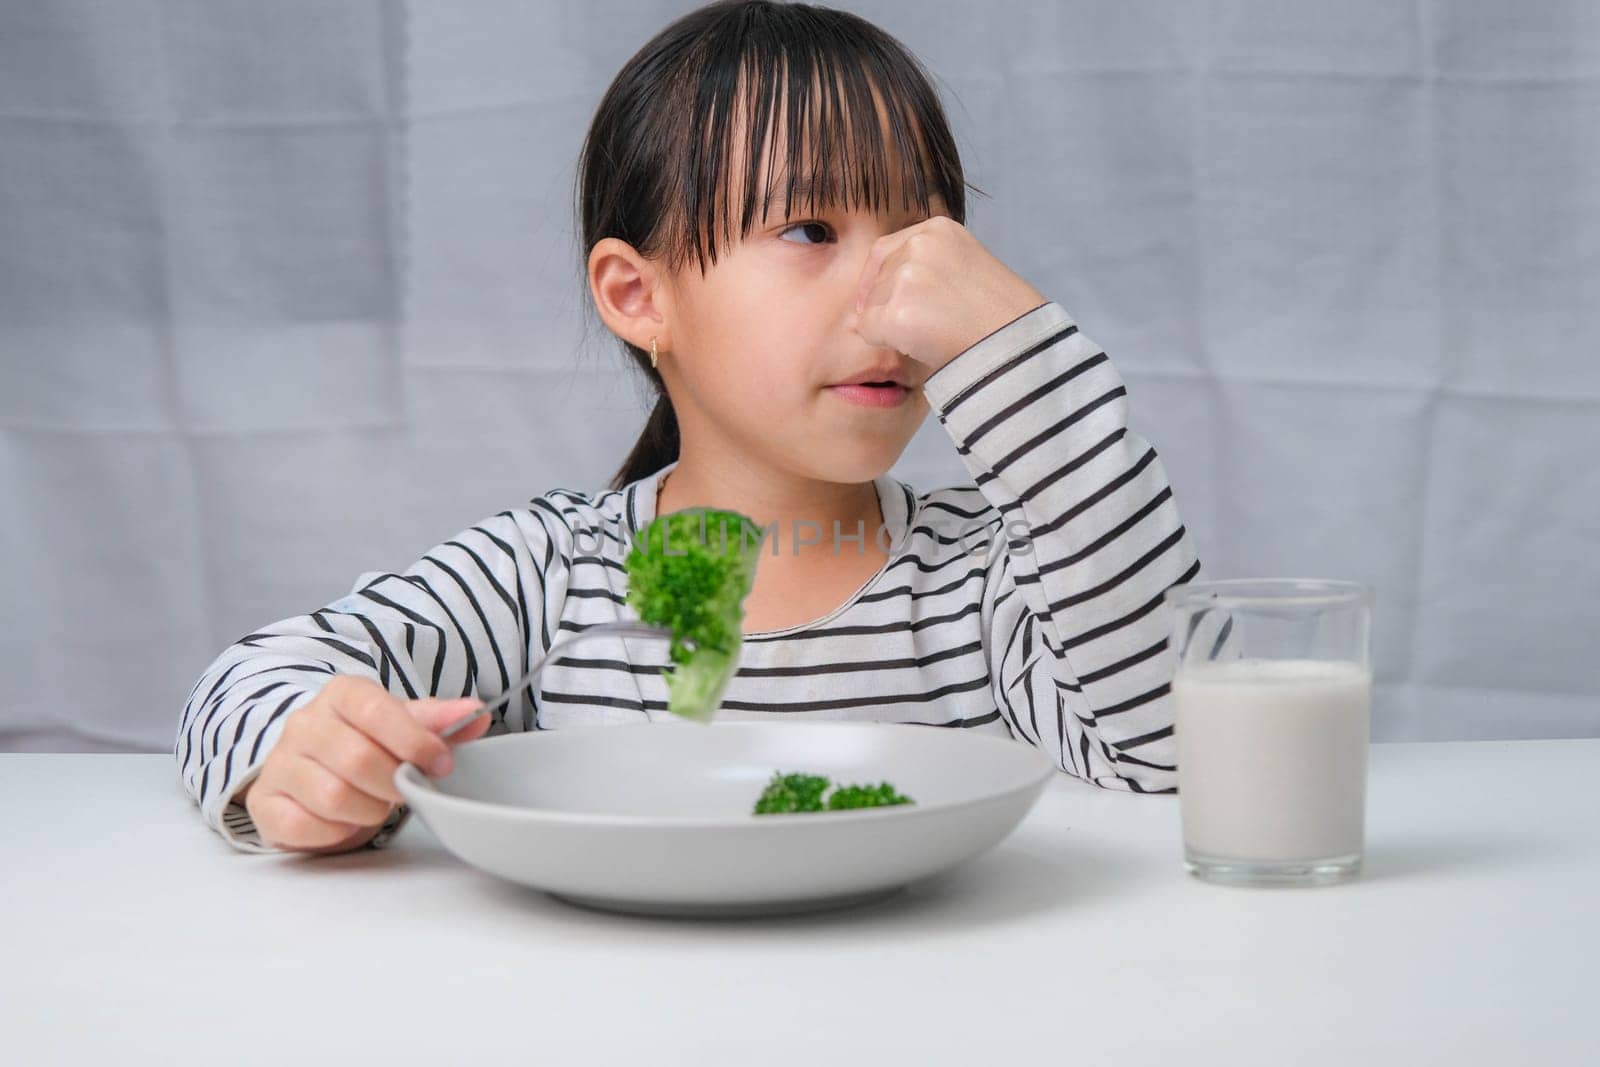 Children don't like to eat vegetables. Cute Asian girl refusing to eat healthy vegetables. Nutrition and healthy eating habits for children. by TEERASAK